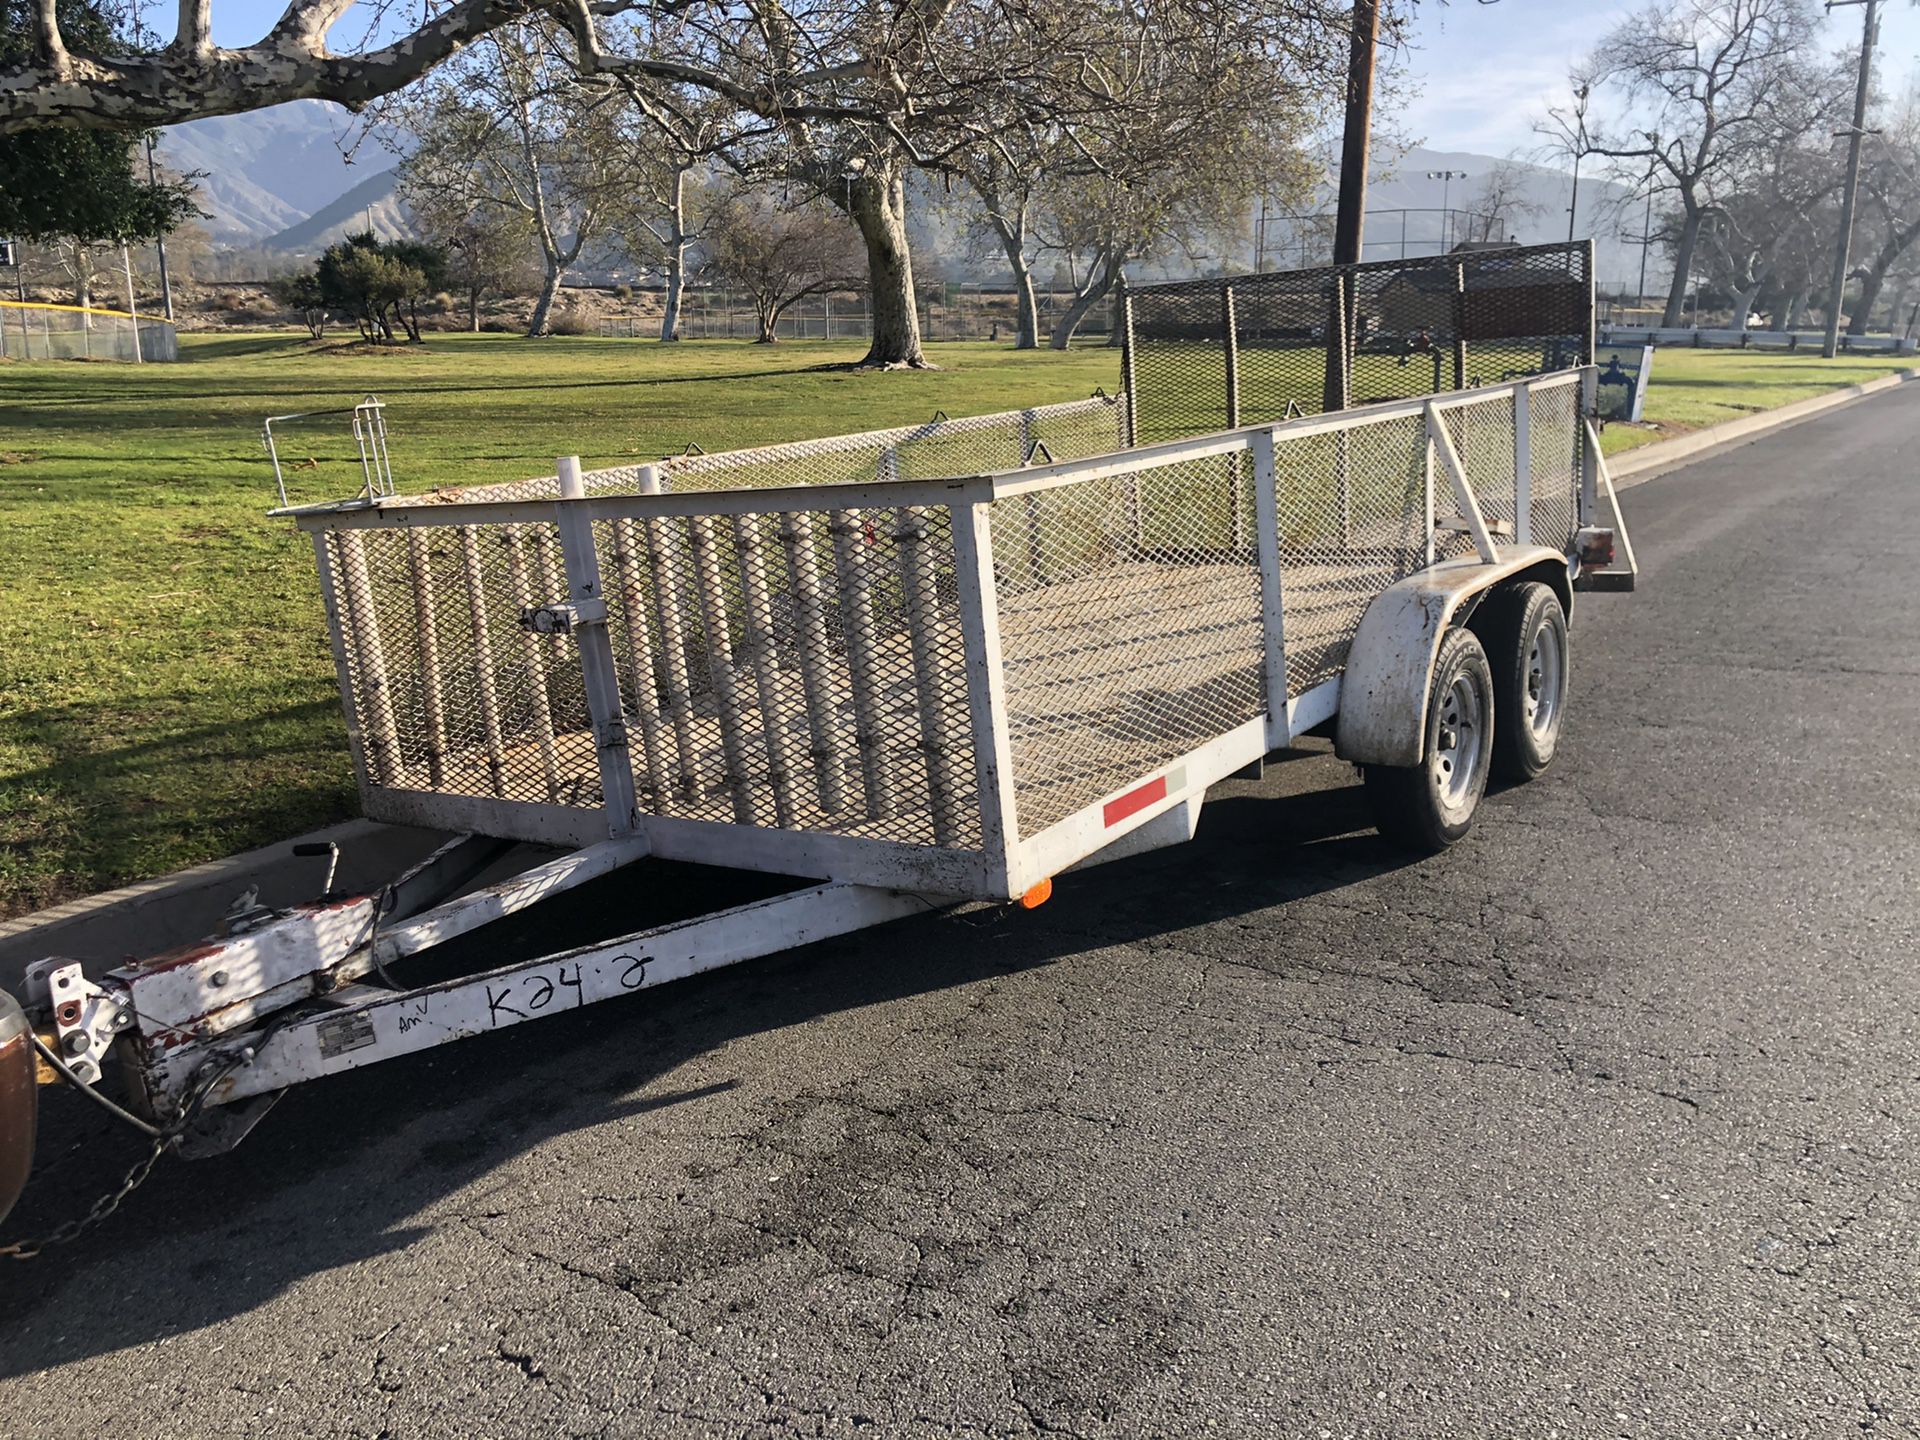 Trailer for sale 7x14 migselling my trailer Pinkslip in hand permanent tags new tires electric brakes ramp heavy duty ready to work